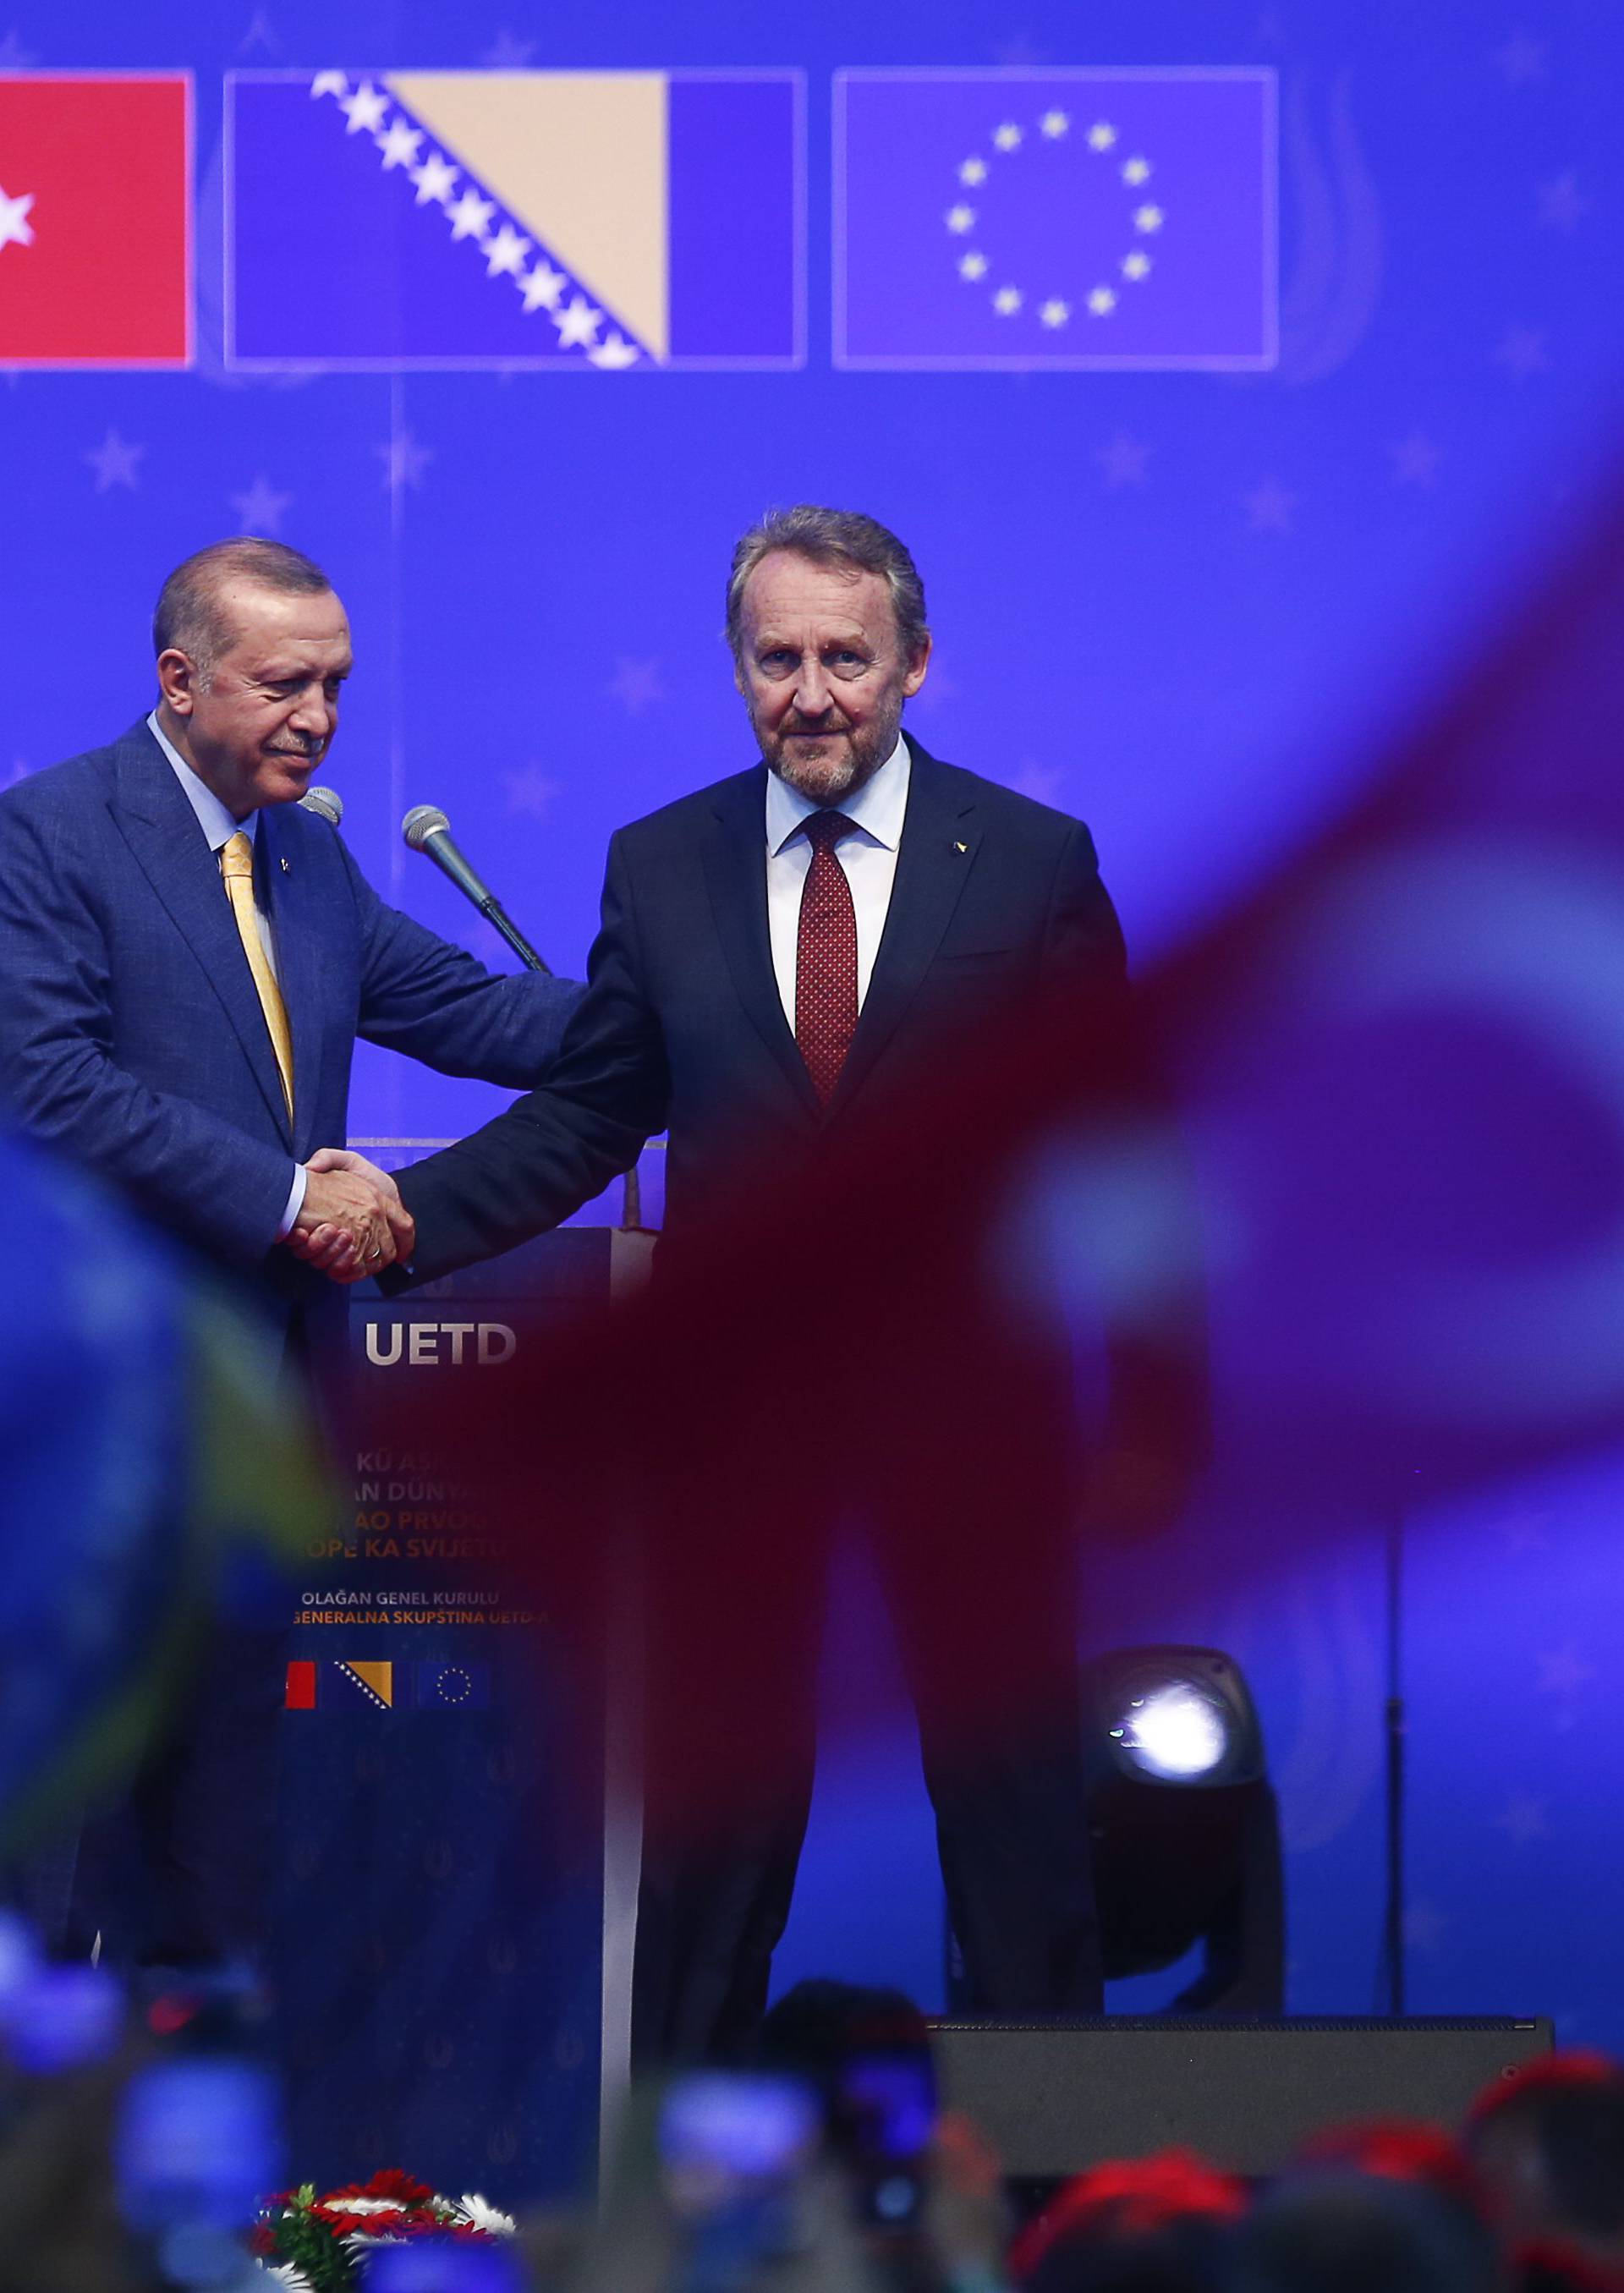 Turkish President Erdogan and Chairman of the Tripartite Presidency of Bosnia and Herzegovina Izetbegovic attend a pre-election rally in Sarajevo